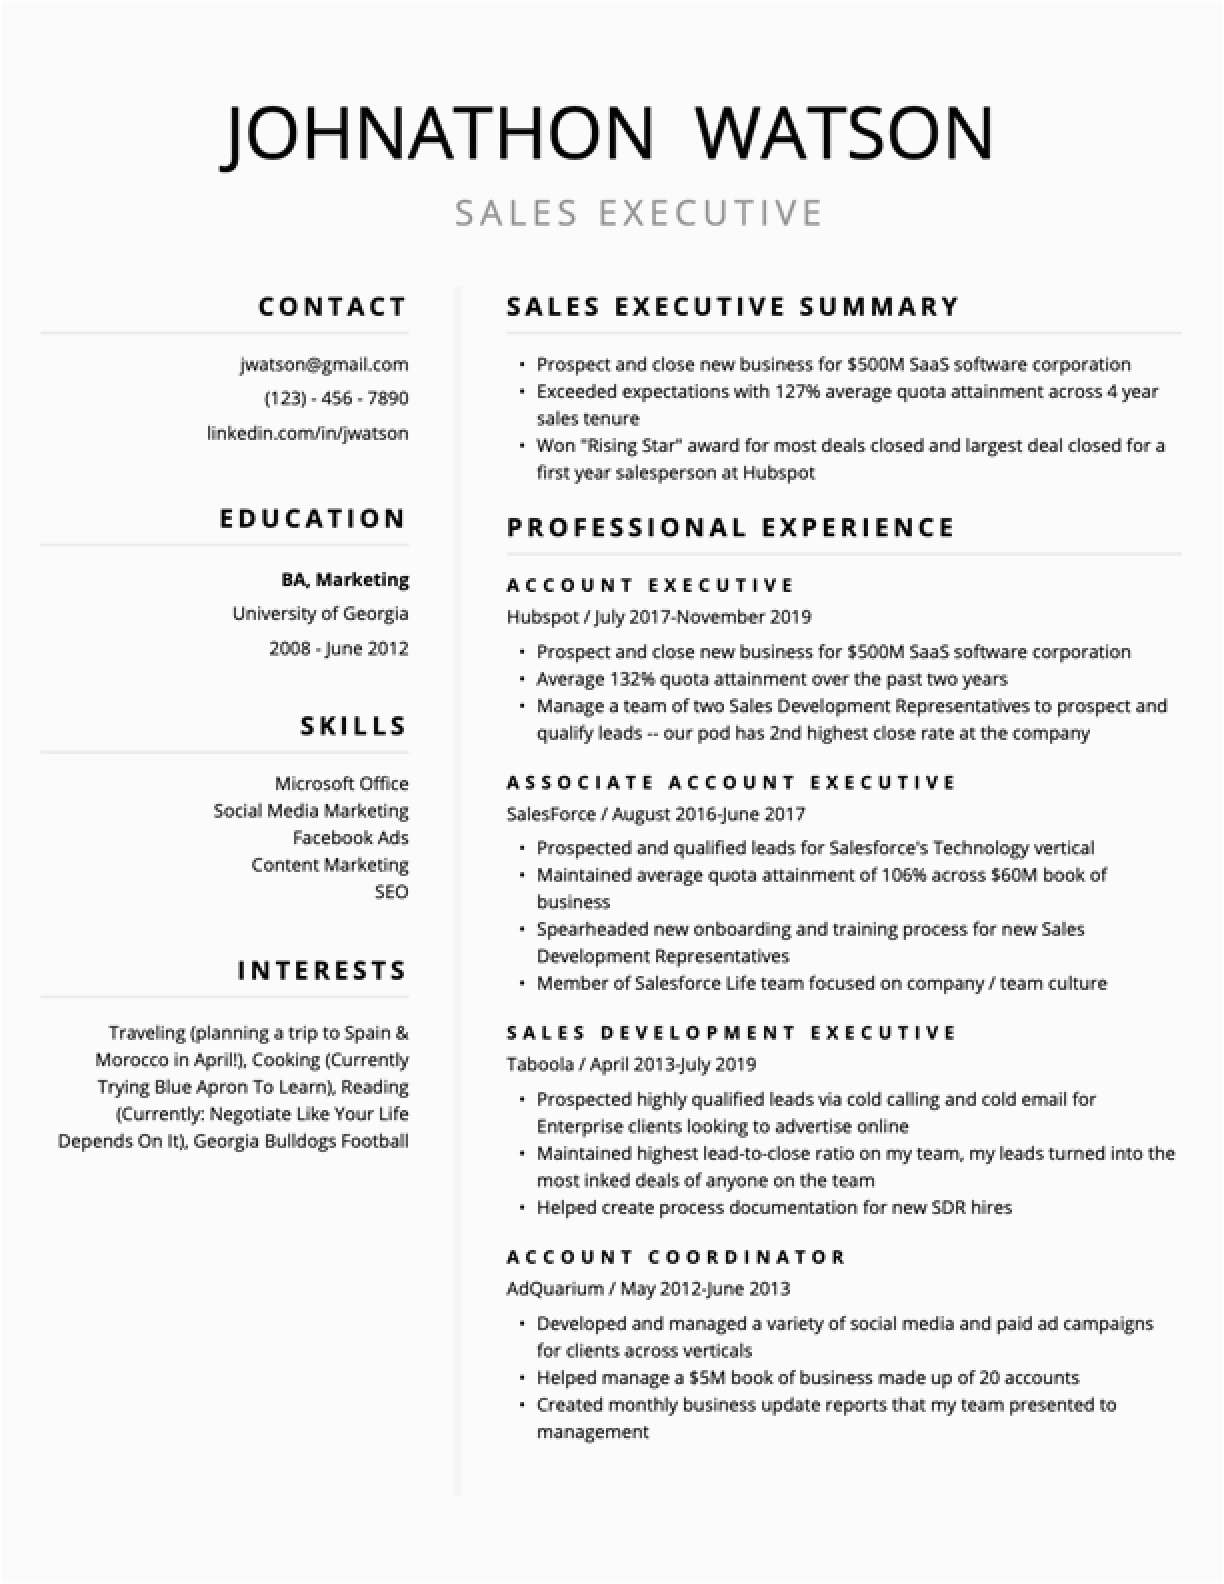 Sample Resume format that Can Be Edited Free Resume Templates for 2021 Edit & Download